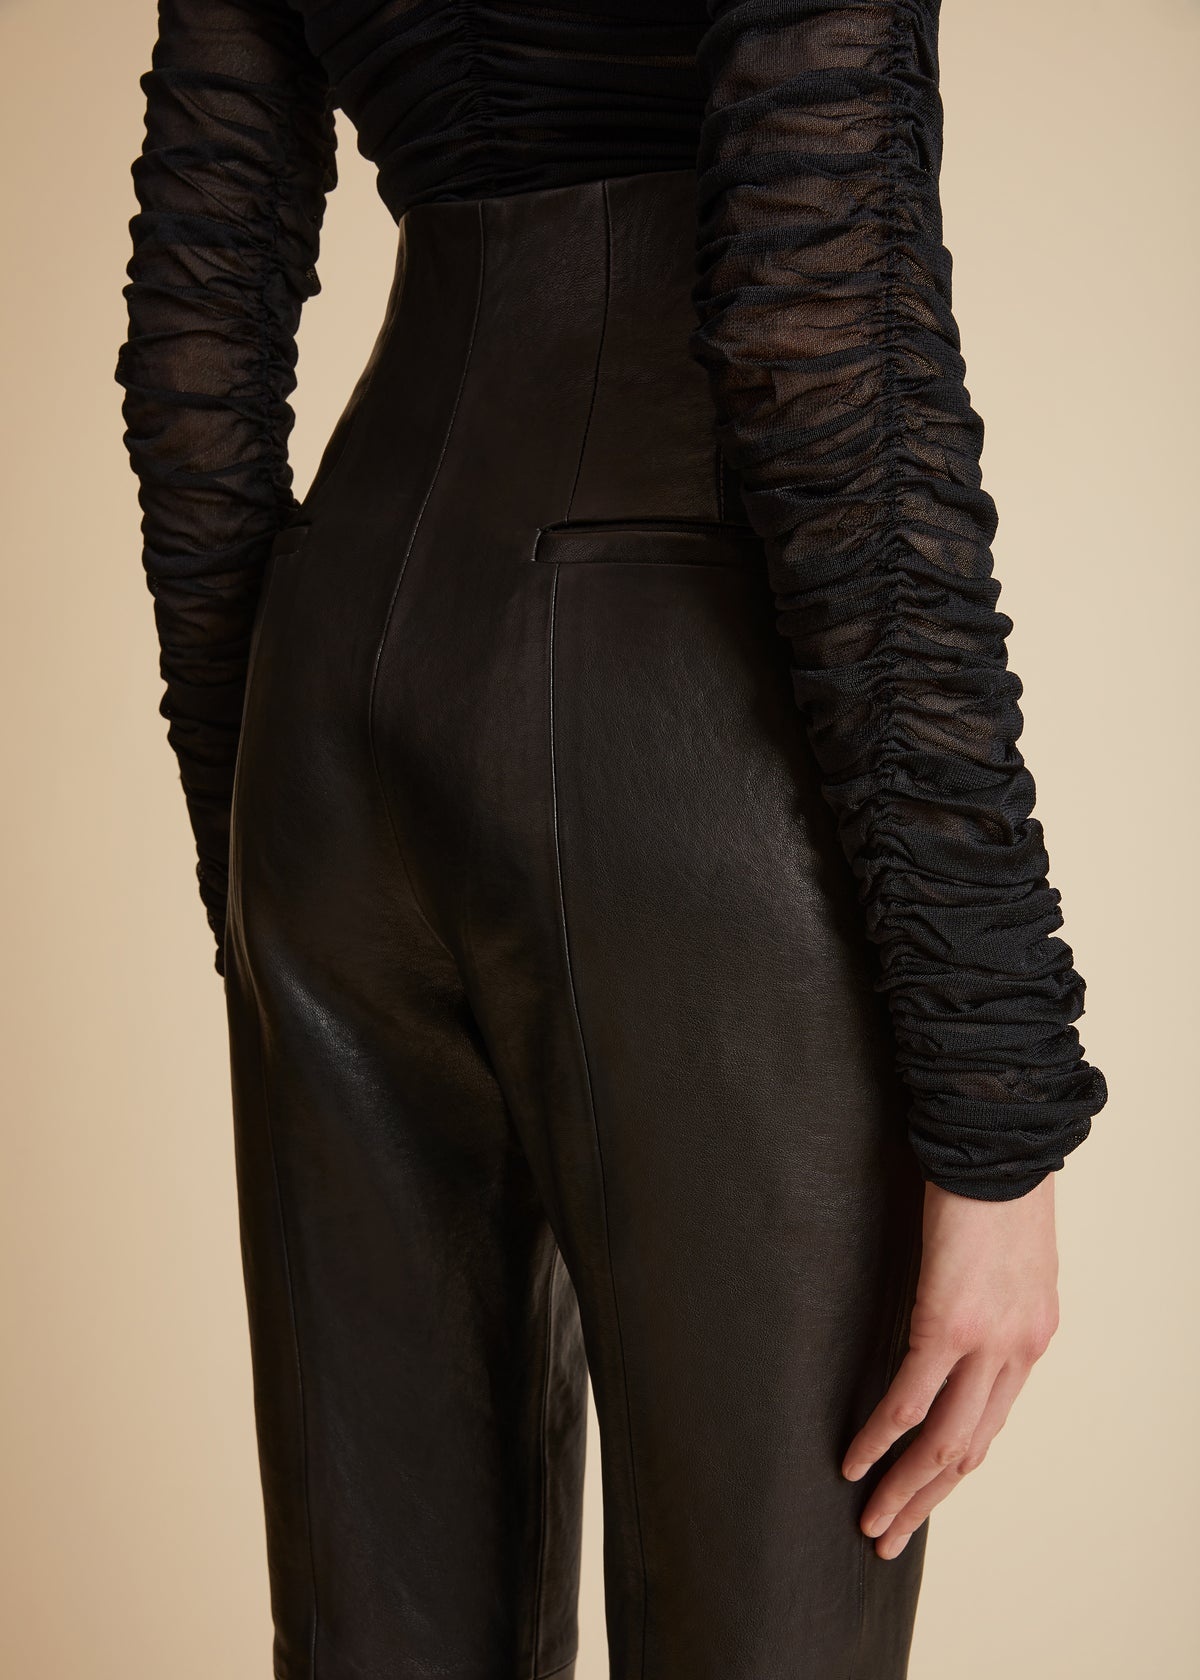 The Lenn Pant in Black Leather - 5